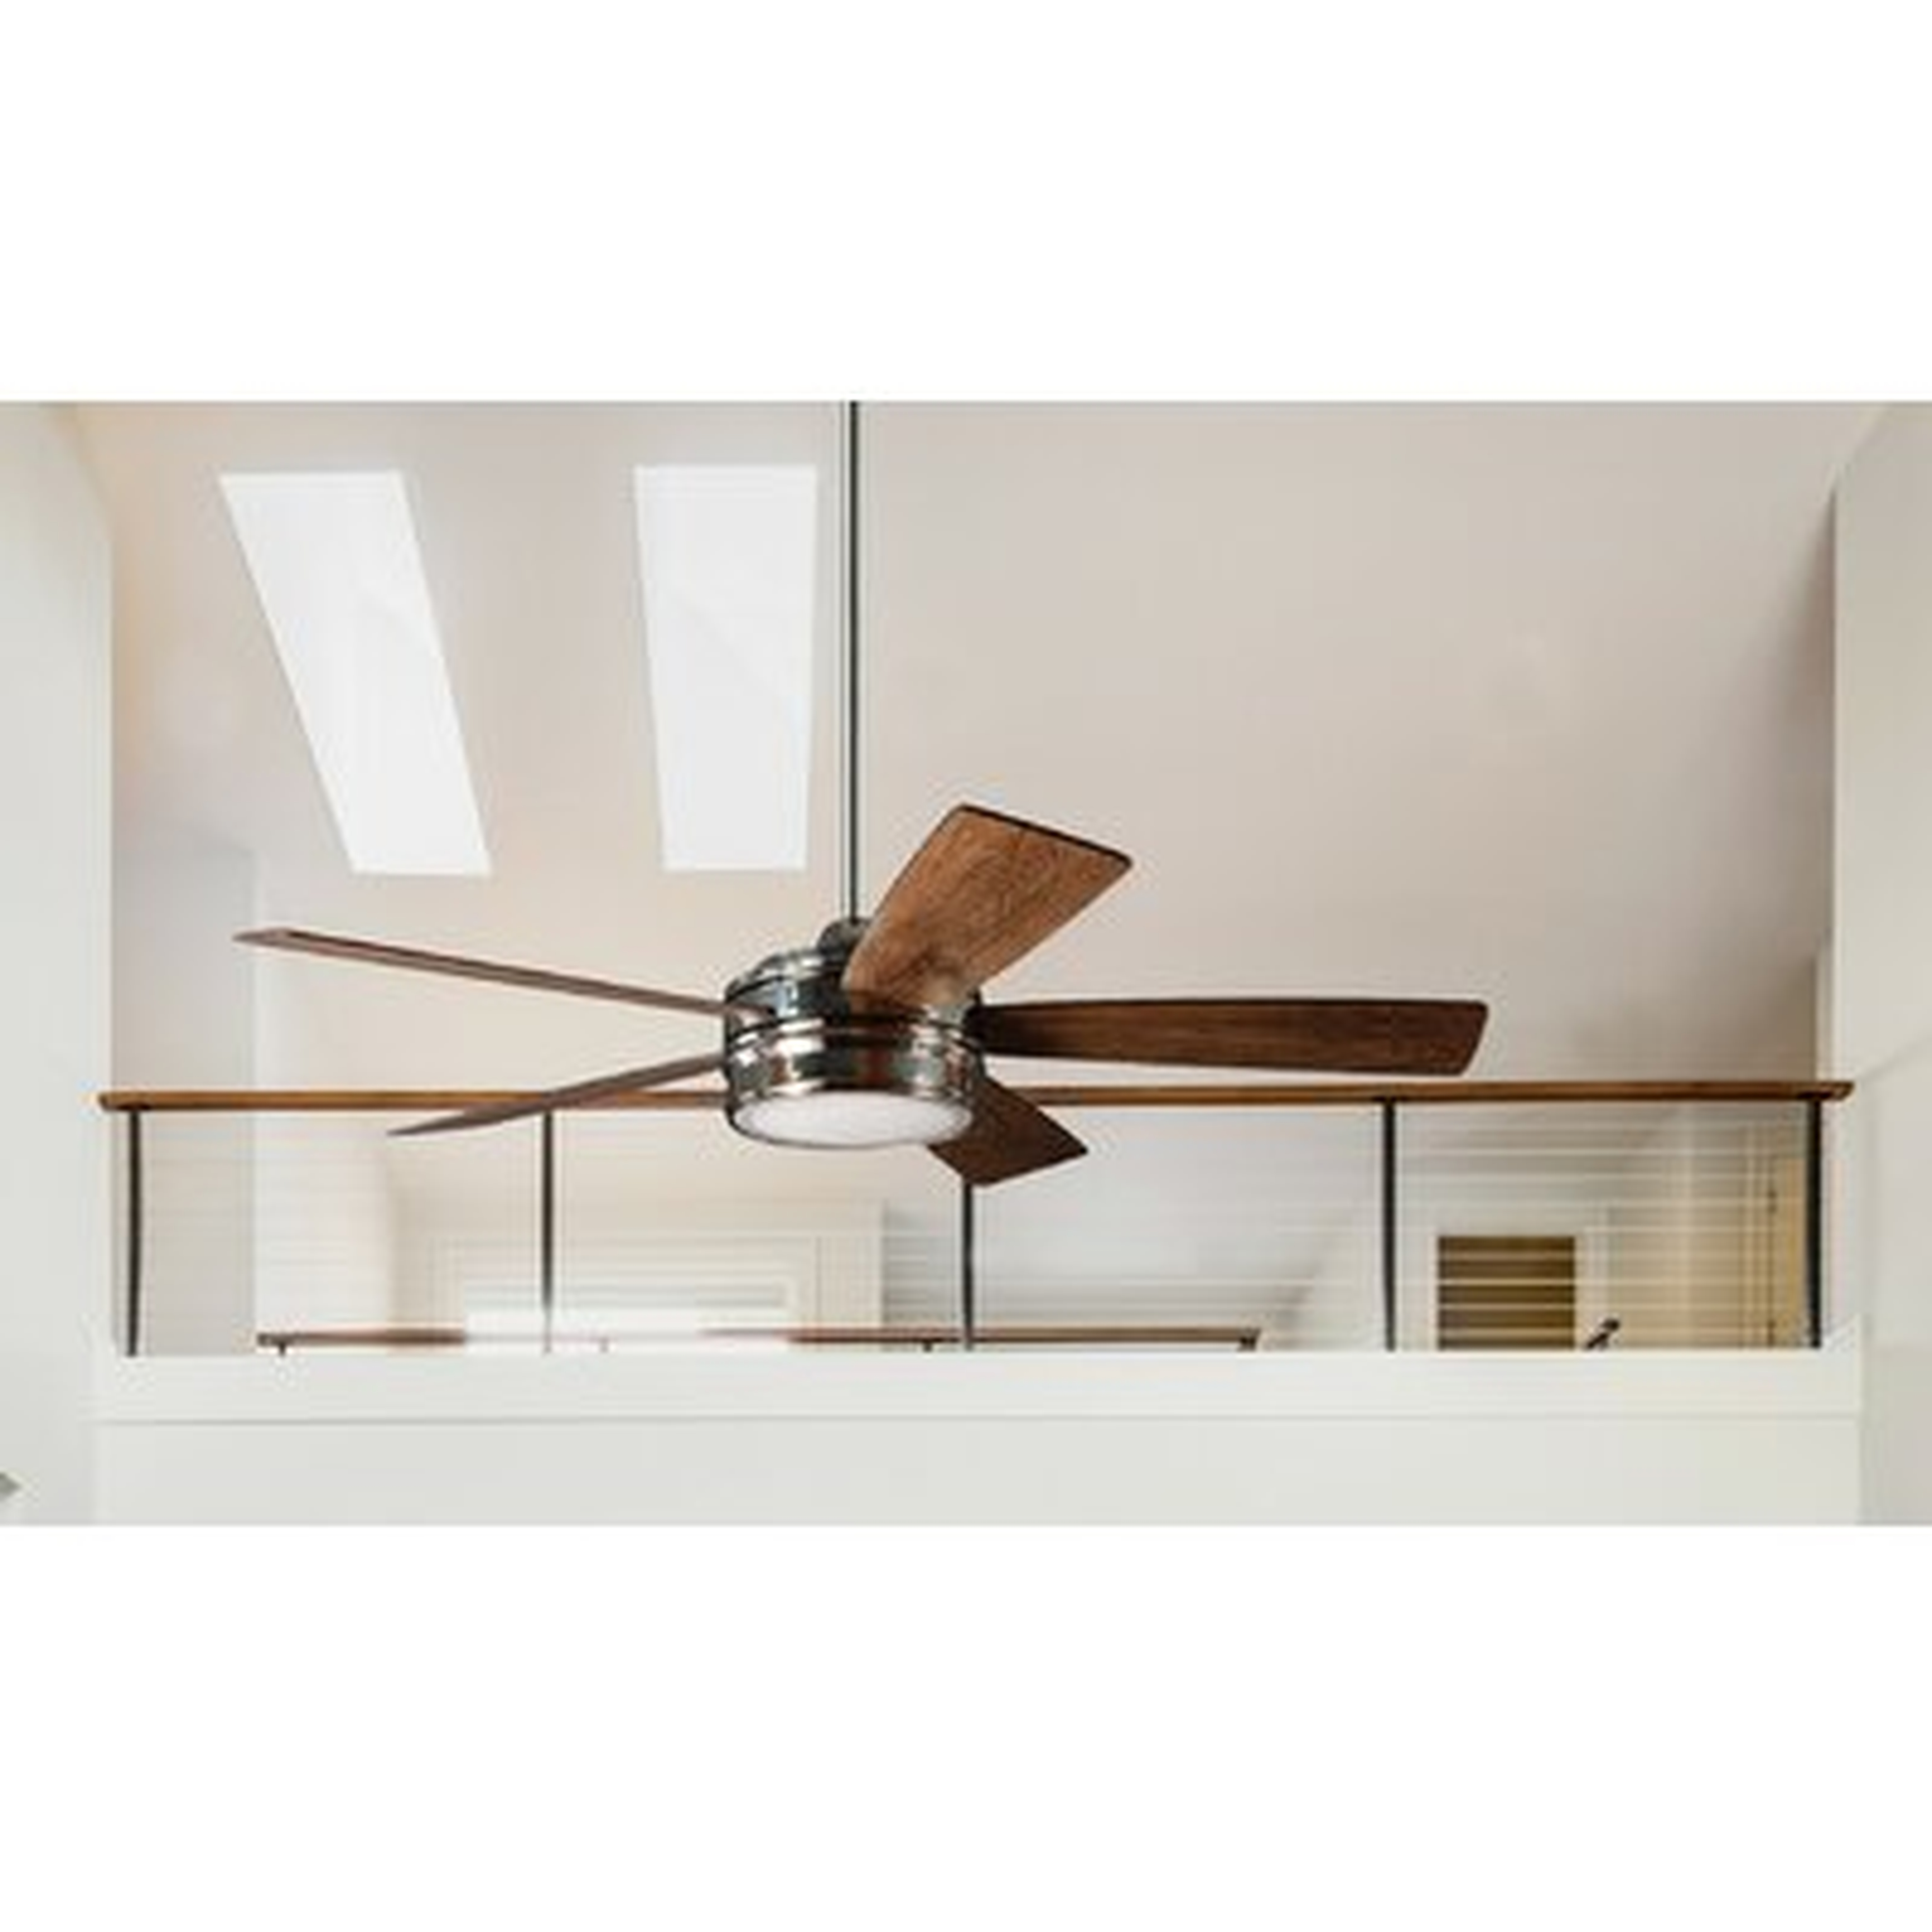 Winchcombe52"  5 - Blade LED Standard Ceiling Fan with Light Kit Included - Birch Lane